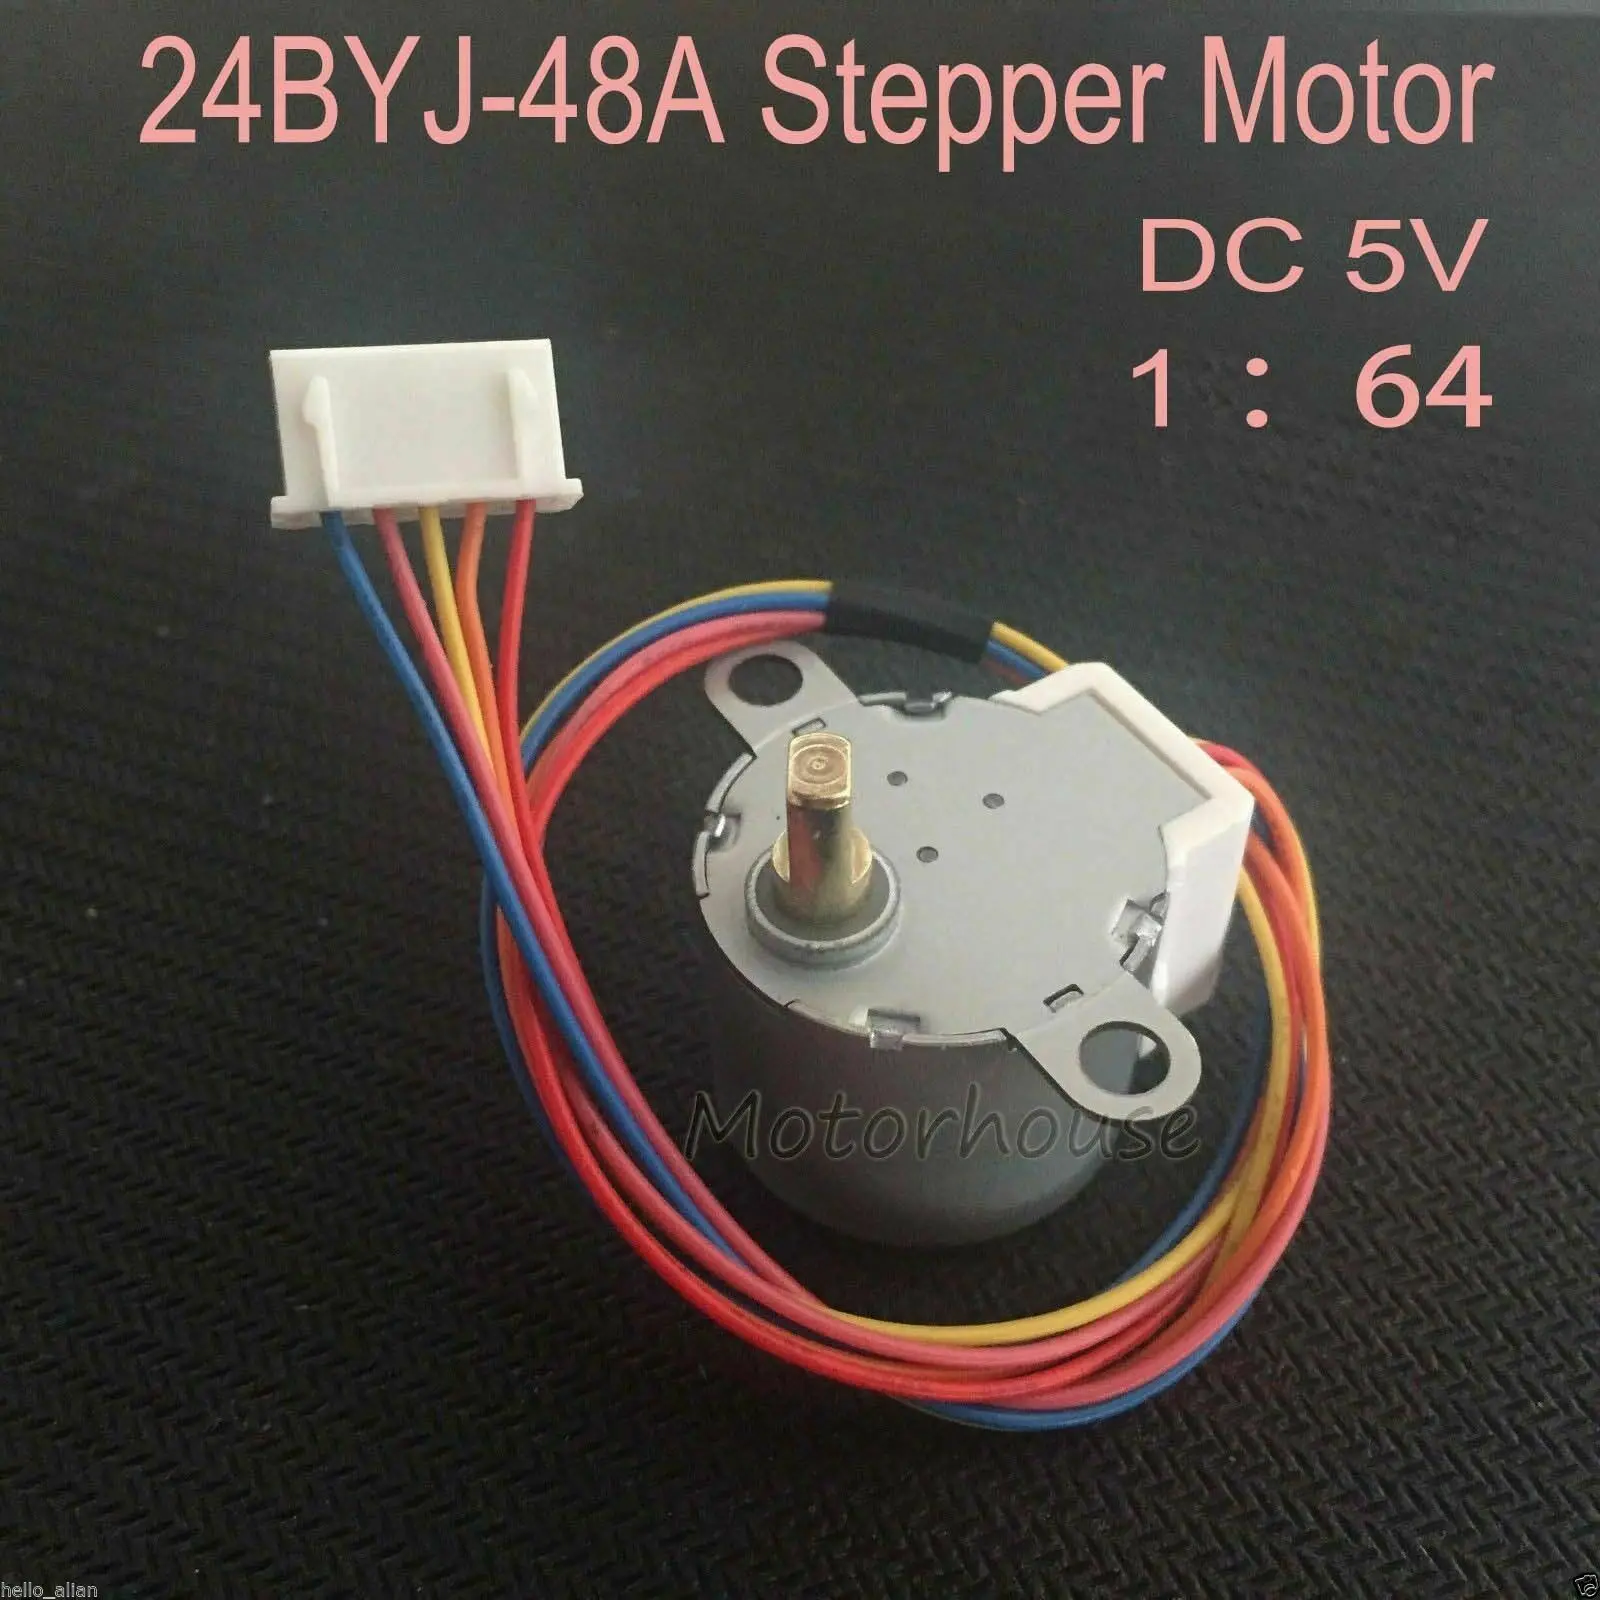 

24BYJ48 Micro 4-Phase 5-Wire Stepping Motor DC 5V Gear Reduction Stepper Motor Micro For Camera Monitoring air conditioner Robot